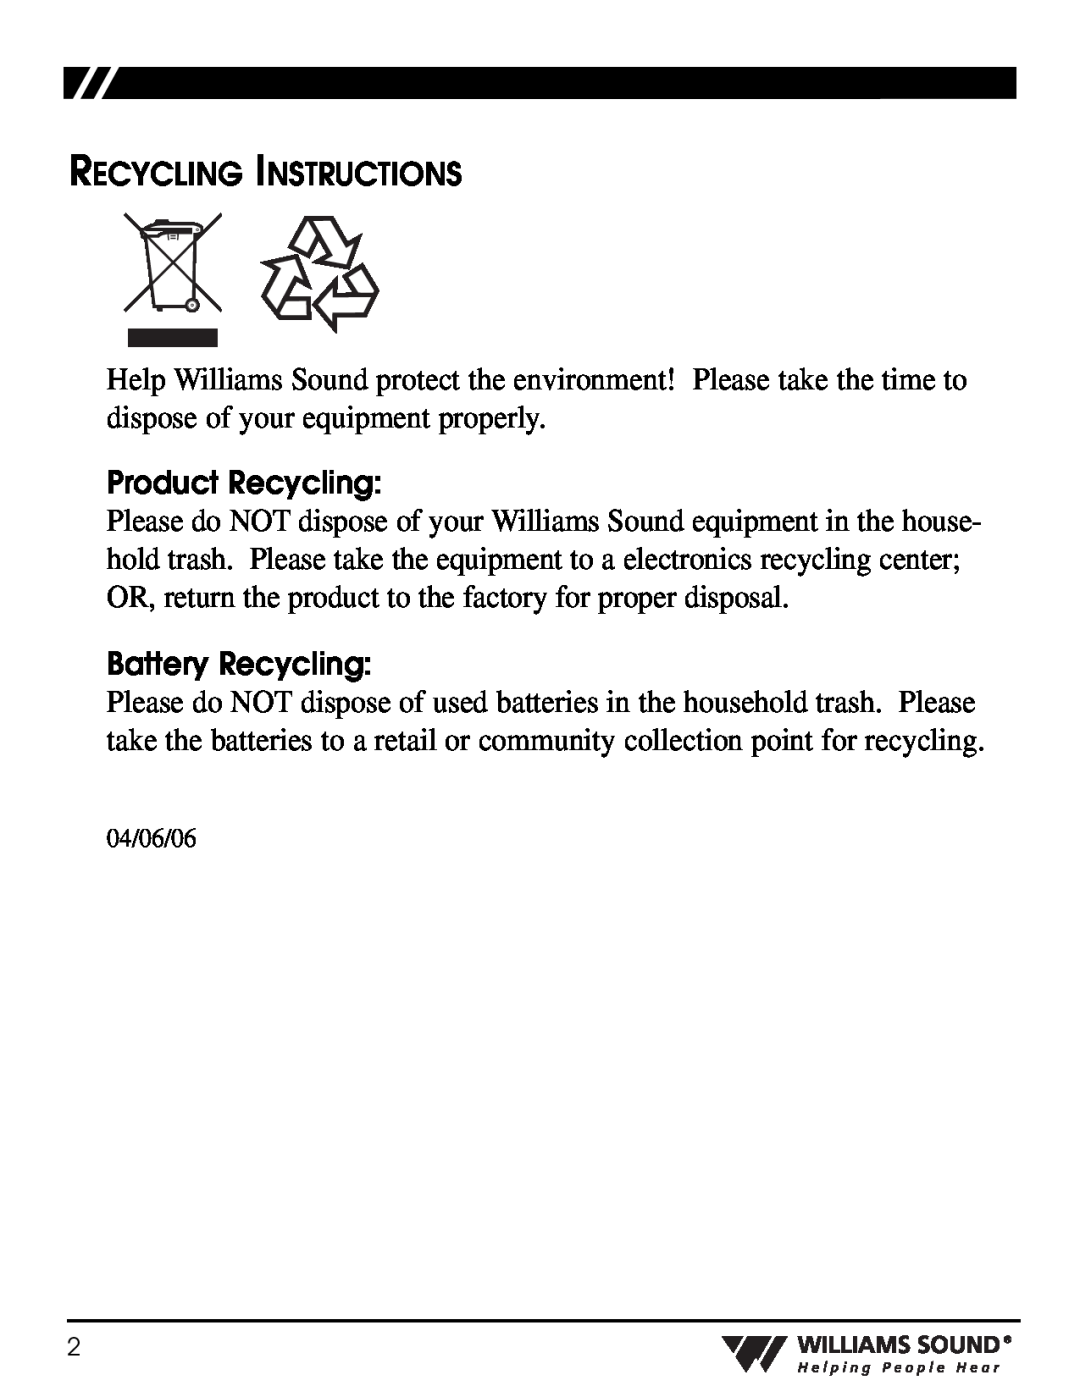 Williams Sound WIR RX16 manual Recycling Instructions, Product Recycling, Battery Recycling, 04/06/06 